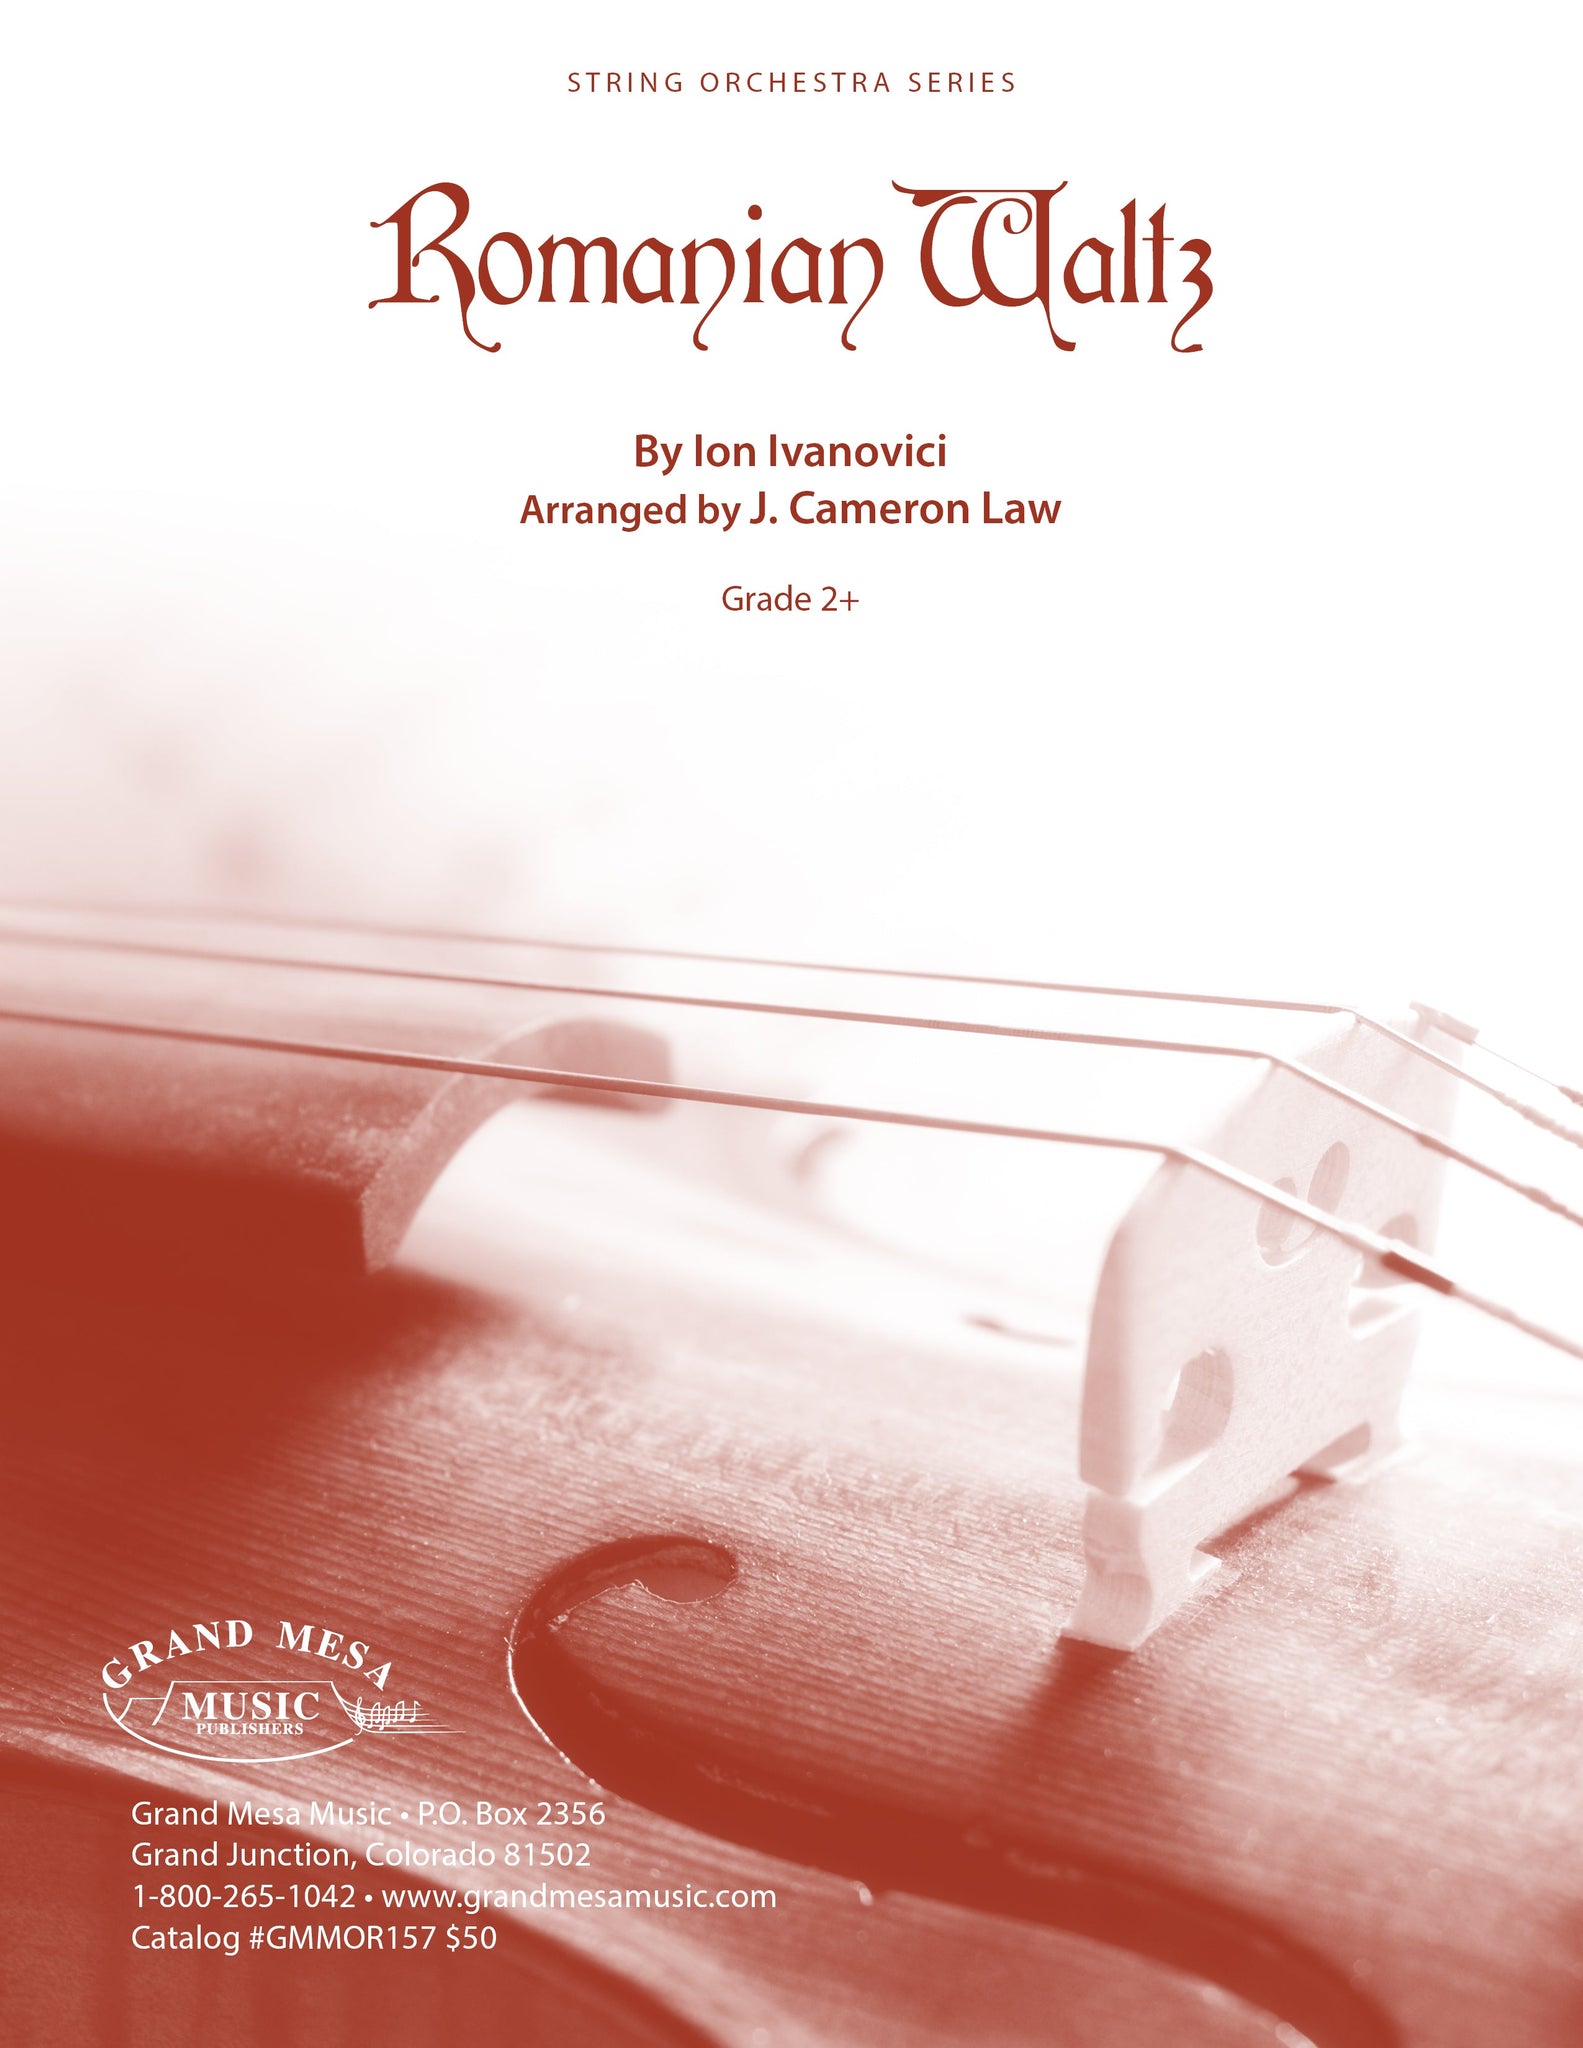 Strings sheet music cover of Romanian Waltz, composed by Ion Ivanovici, arranged by J. Cameron Law.